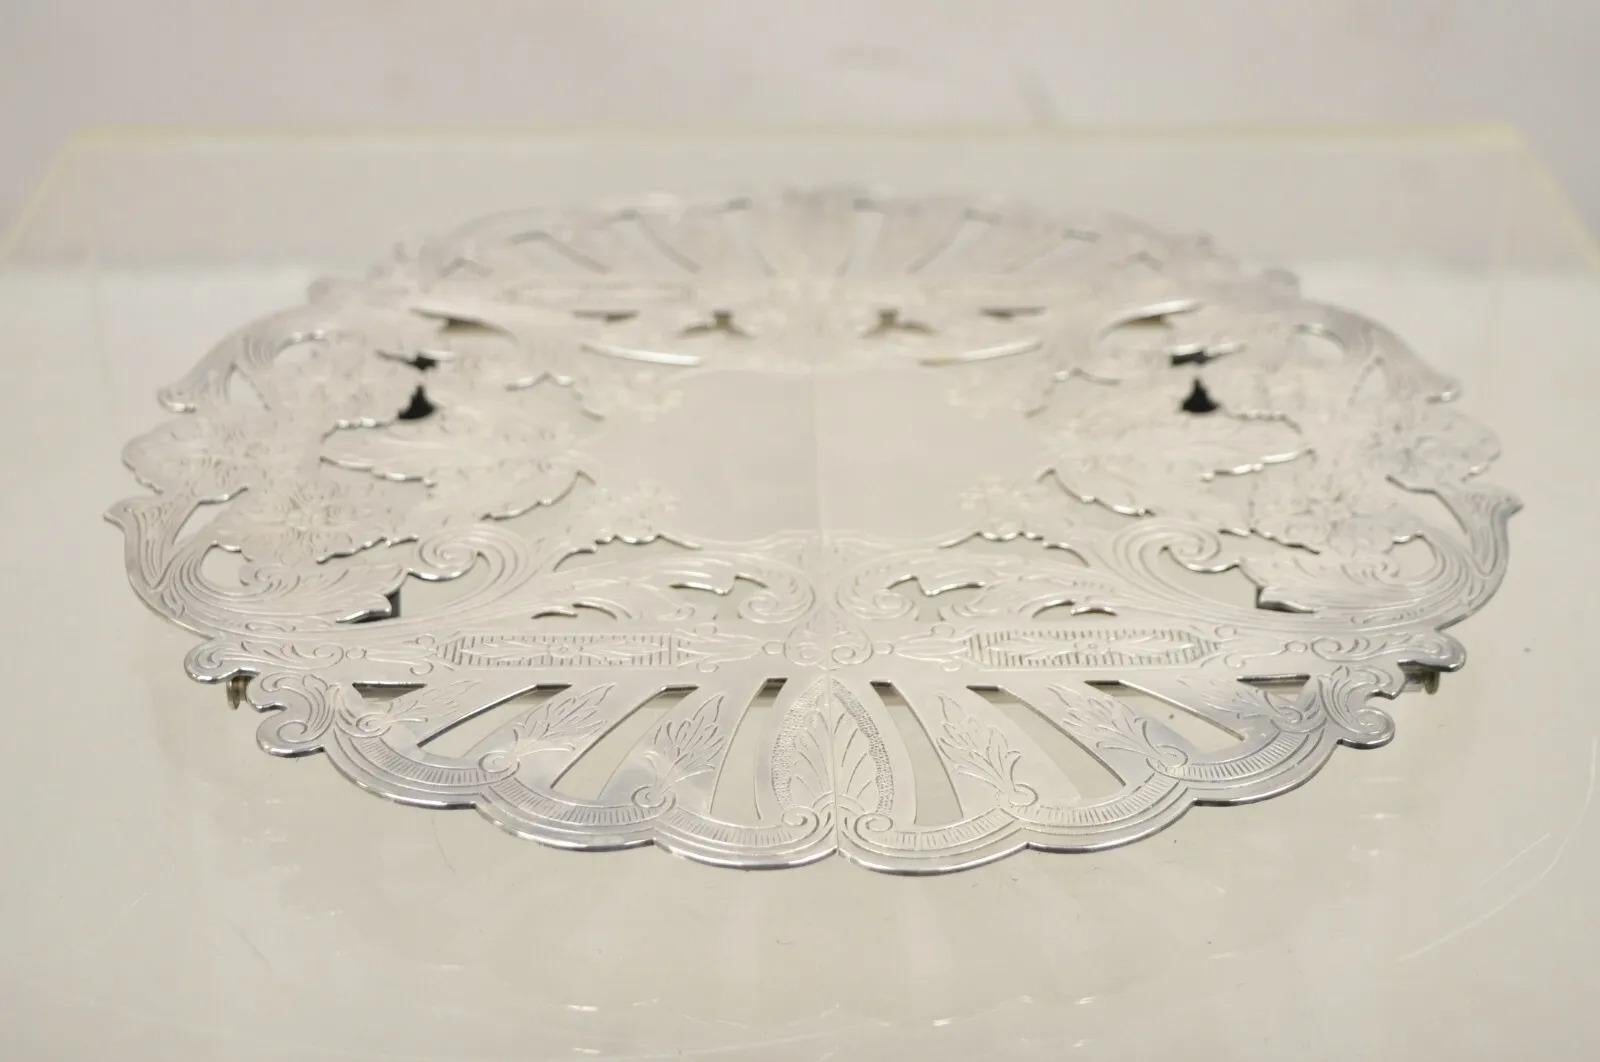 Vintage Wallace Silverplate 7333 Silver Plated Ornate Expanding Hot Plate Trivet. Circa Mid to Late 20th Century
Measurements: 0.5